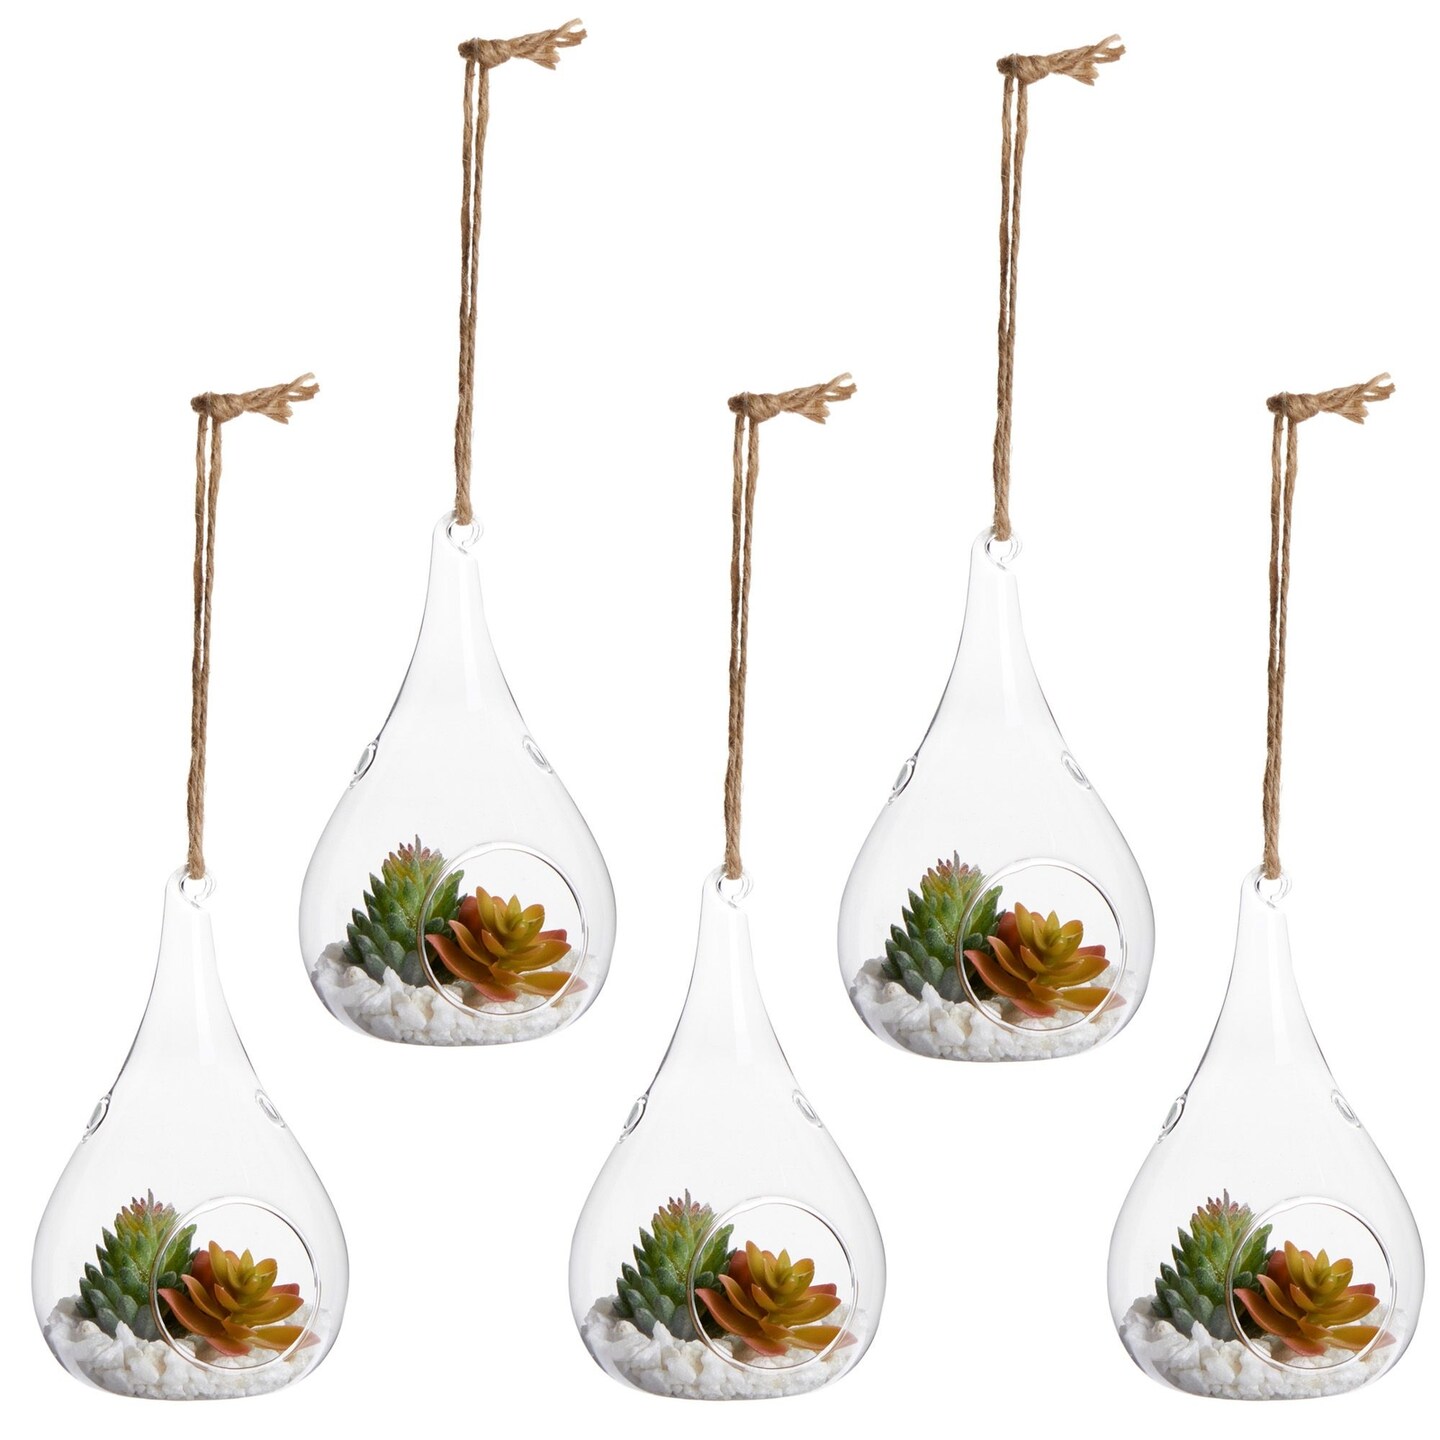 5-Pack Hanging Glass Terrarium Containers - Air Plant Holder, Succulent Planter, Tea Light Candle Hangers (3.5x5 In)